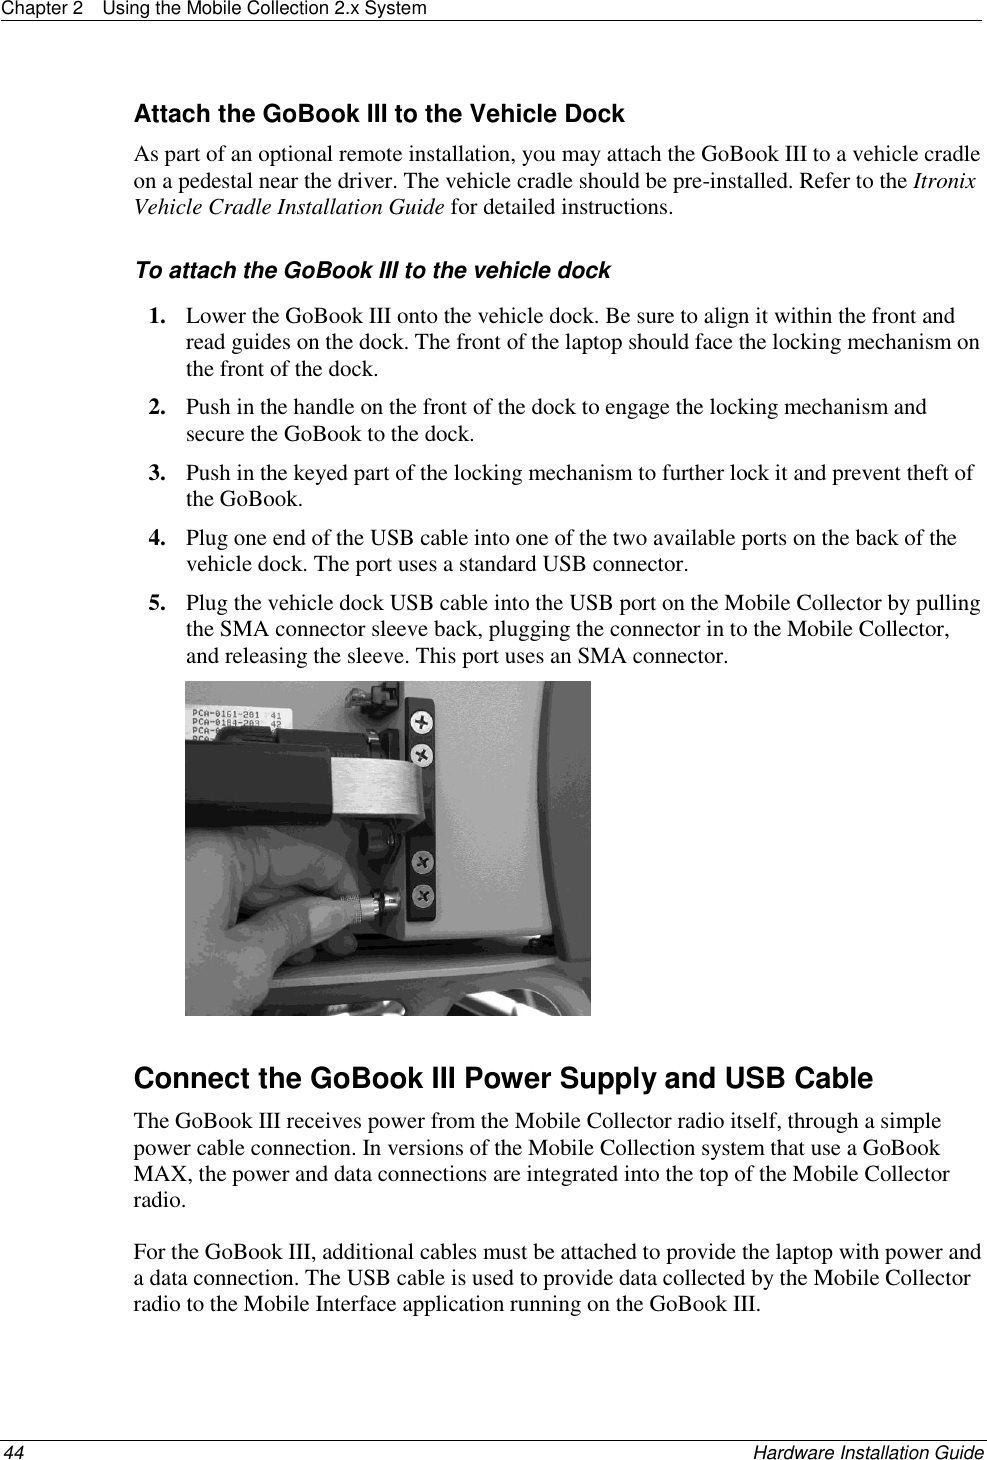 Chapter 2  Using the Mobile Collection 2.x System  44    Hardware Installation Guide  Attach the GoBook III to the Vehicle Dock As part of an optional remote installation, you may attach the GoBook III to a vehicle cradle on a pedestal near the driver. The vehicle cradle should be pre-installed. Refer to the Itronix Vehicle Cradle Installation Guide for detailed instructions. To attach the GoBook III to the vehicle dock 1. Lower the GoBook III onto the vehicle dock. Be sure to align it within the front and read guides on the dock. The front of the laptop should face the locking mechanism on the front of the dock.  2. Push in the handle on the front of the dock to engage the locking mechanism and secure the GoBook to the dock.  3. Push in the keyed part of the locking mechanism to further lock it and prevent theft of the GoBook.  4. Plug one end of the USB cable into one of the two available ports on the back of the vehicle dock. The port uses a standard USB connector. 5. Plug the vehicle dock USB cable into the USB port on the Mobile Collector by pulling the SMA connector sleeve back, plugging the connector in to the Mobile Collector, and releasing the sleeve. This port uses an SMA connector.    Connect the GoBook III Power Supply and USB Cable The GoBook III receives power from the Mobile Collector radio itself, through a simple power cable connection. In versions of the Mobile Collection system that use a GoBook MAX, the power and data connections are integrated into the top of the Mobile Collector radio.  For the GoBook III, additional cables must be attached to provide the laptop with power and a data connection. The USB cable is used to provide data collected by the Mobile Collector radio to the Mobile Interface application running on the GoBook III.  